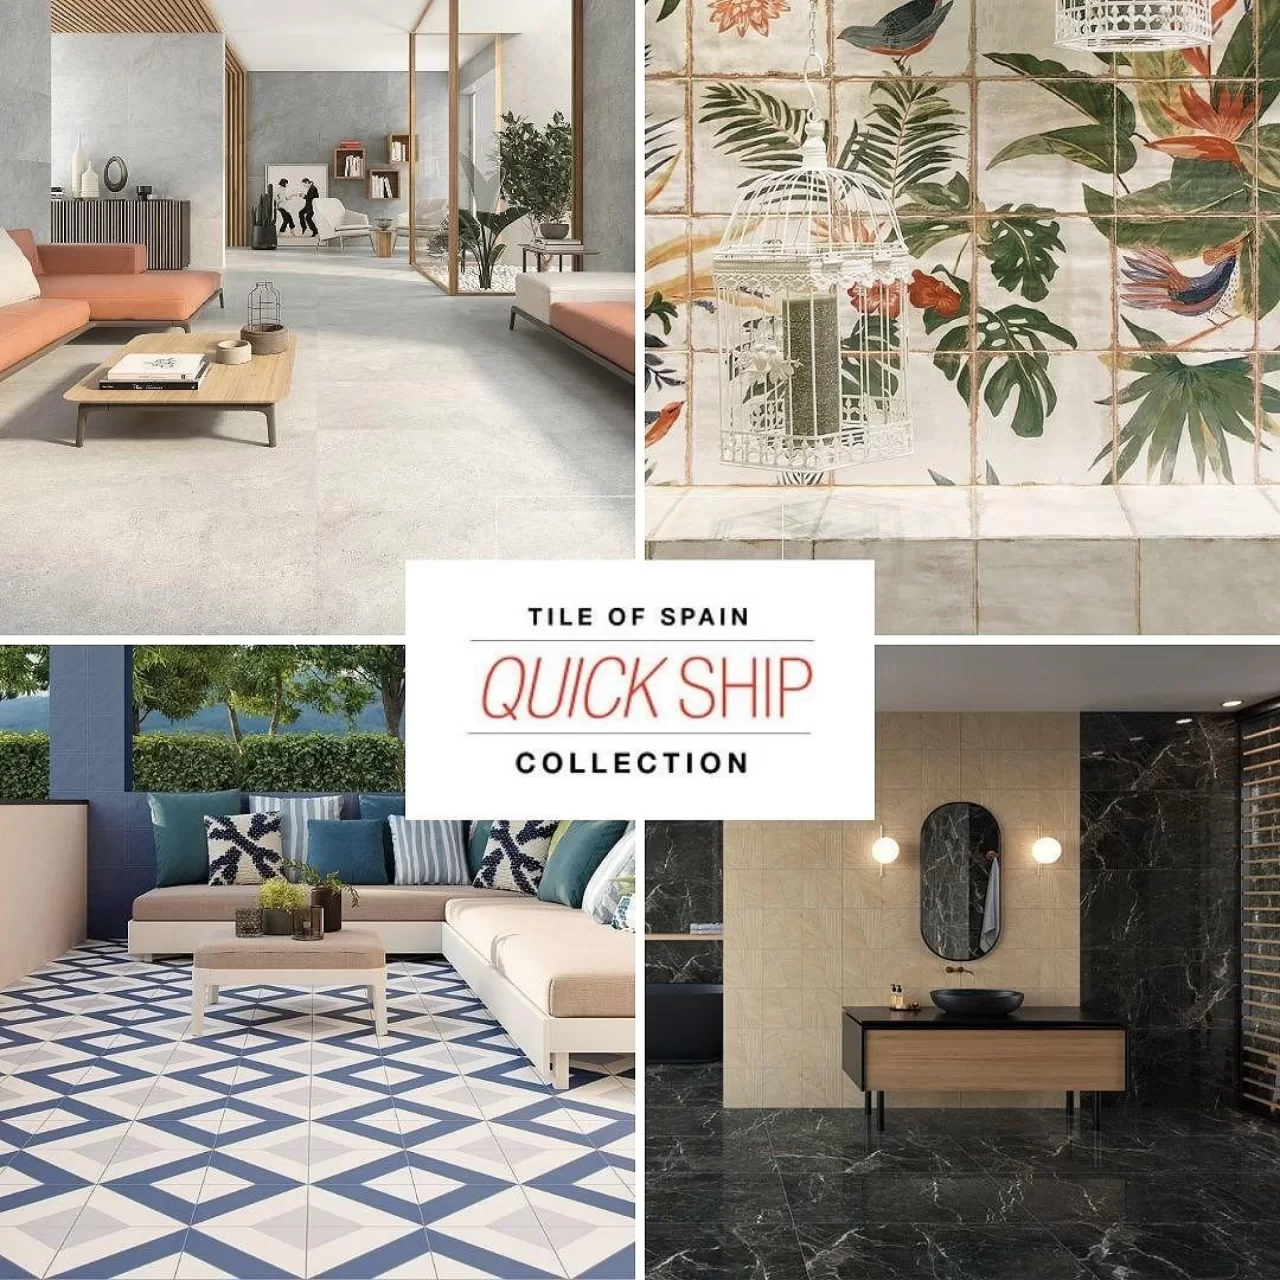 Tile of Spain Celebrates a Decade of Ceramic Innovation with the Debut of its 2022 Quick Ship Collection for the U.S. Market